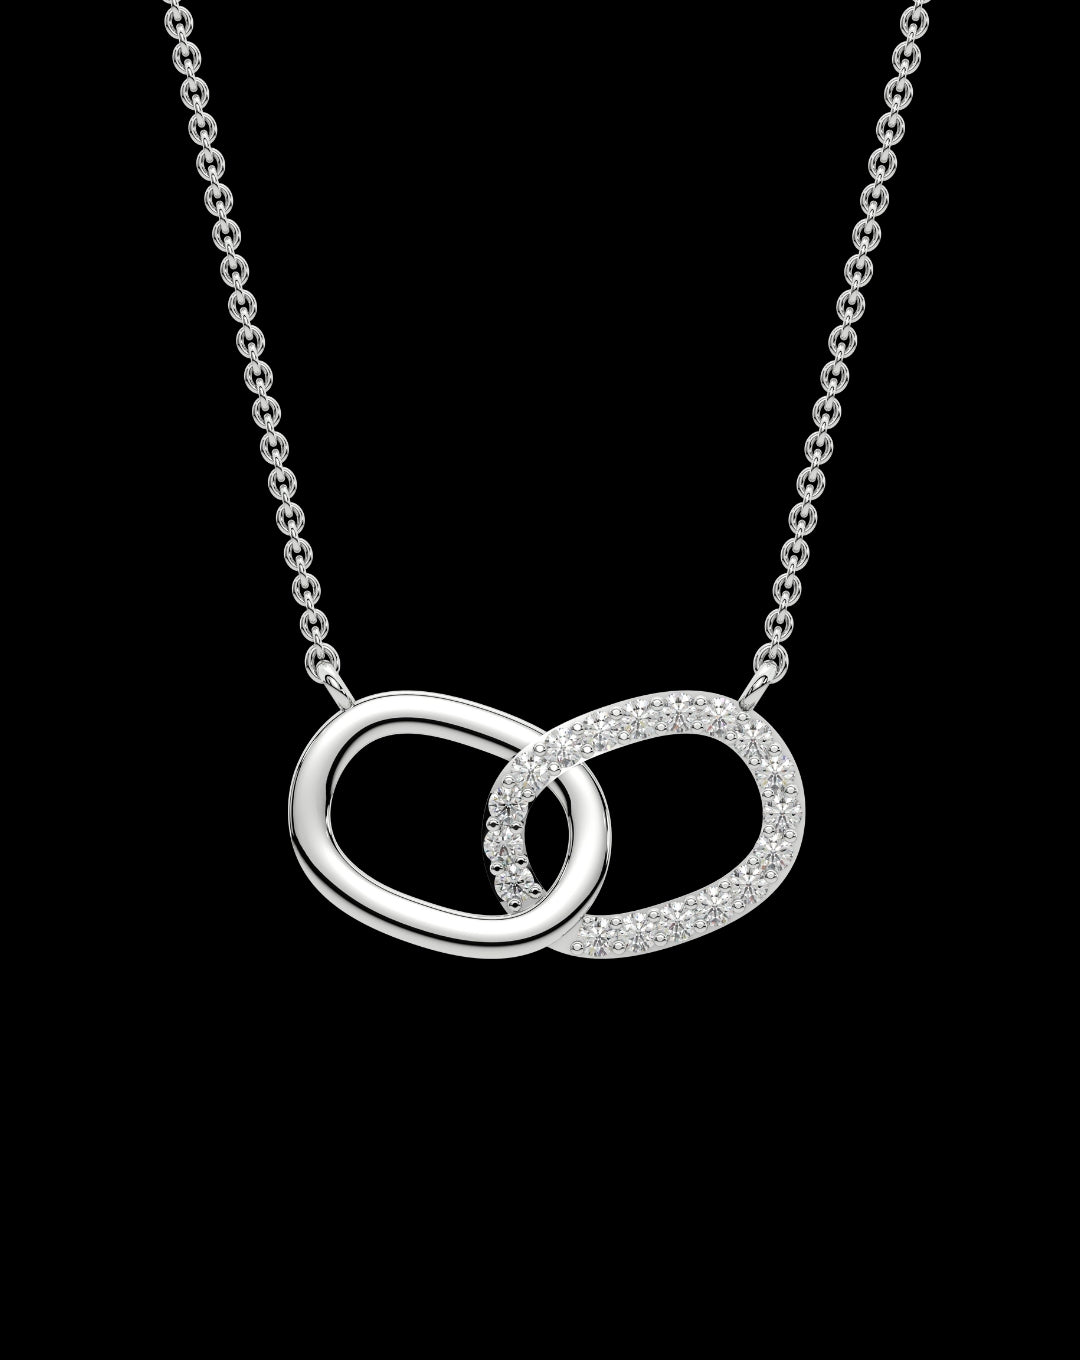 Connected Diamond Round Necklace 925 Silver